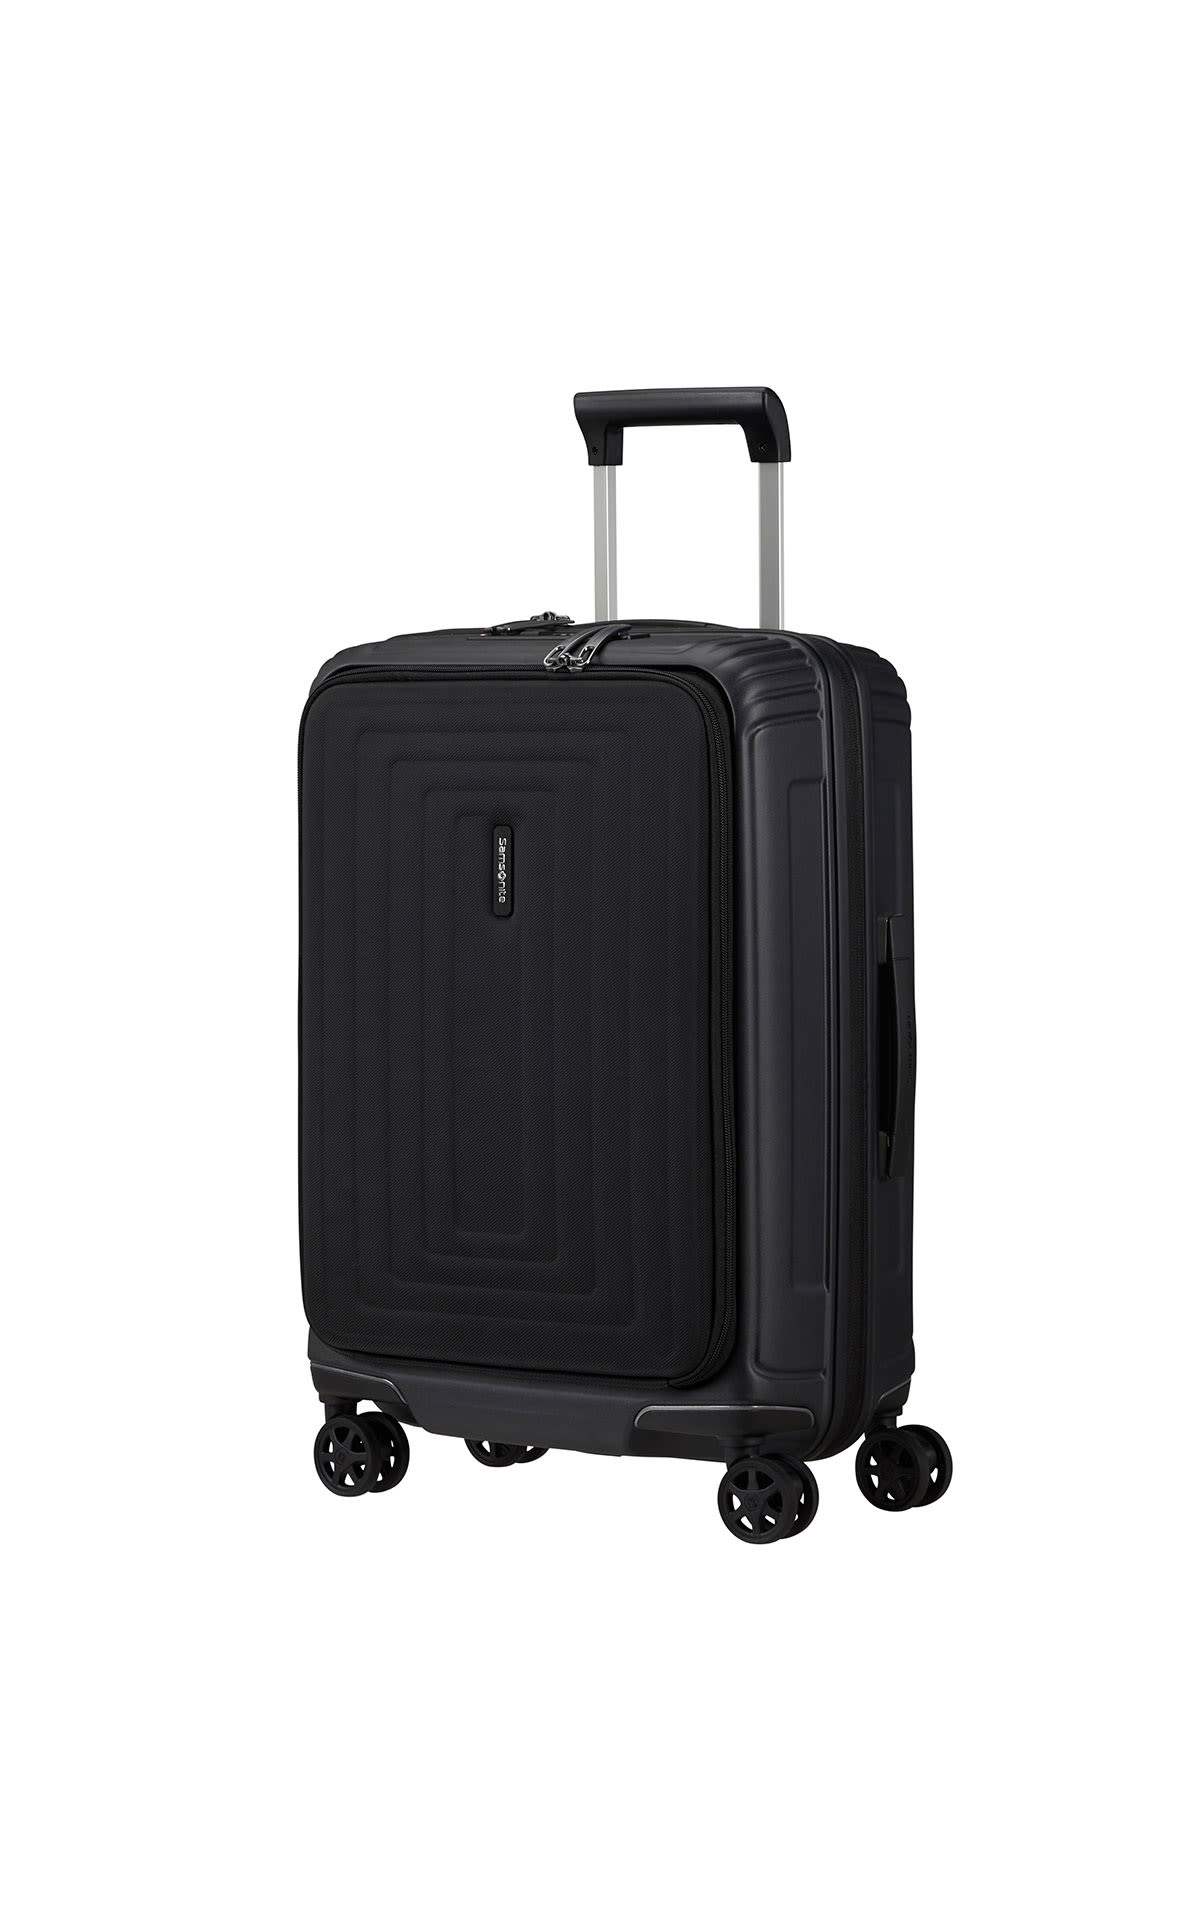 Neopulse suitcase with front pocket Samsonite